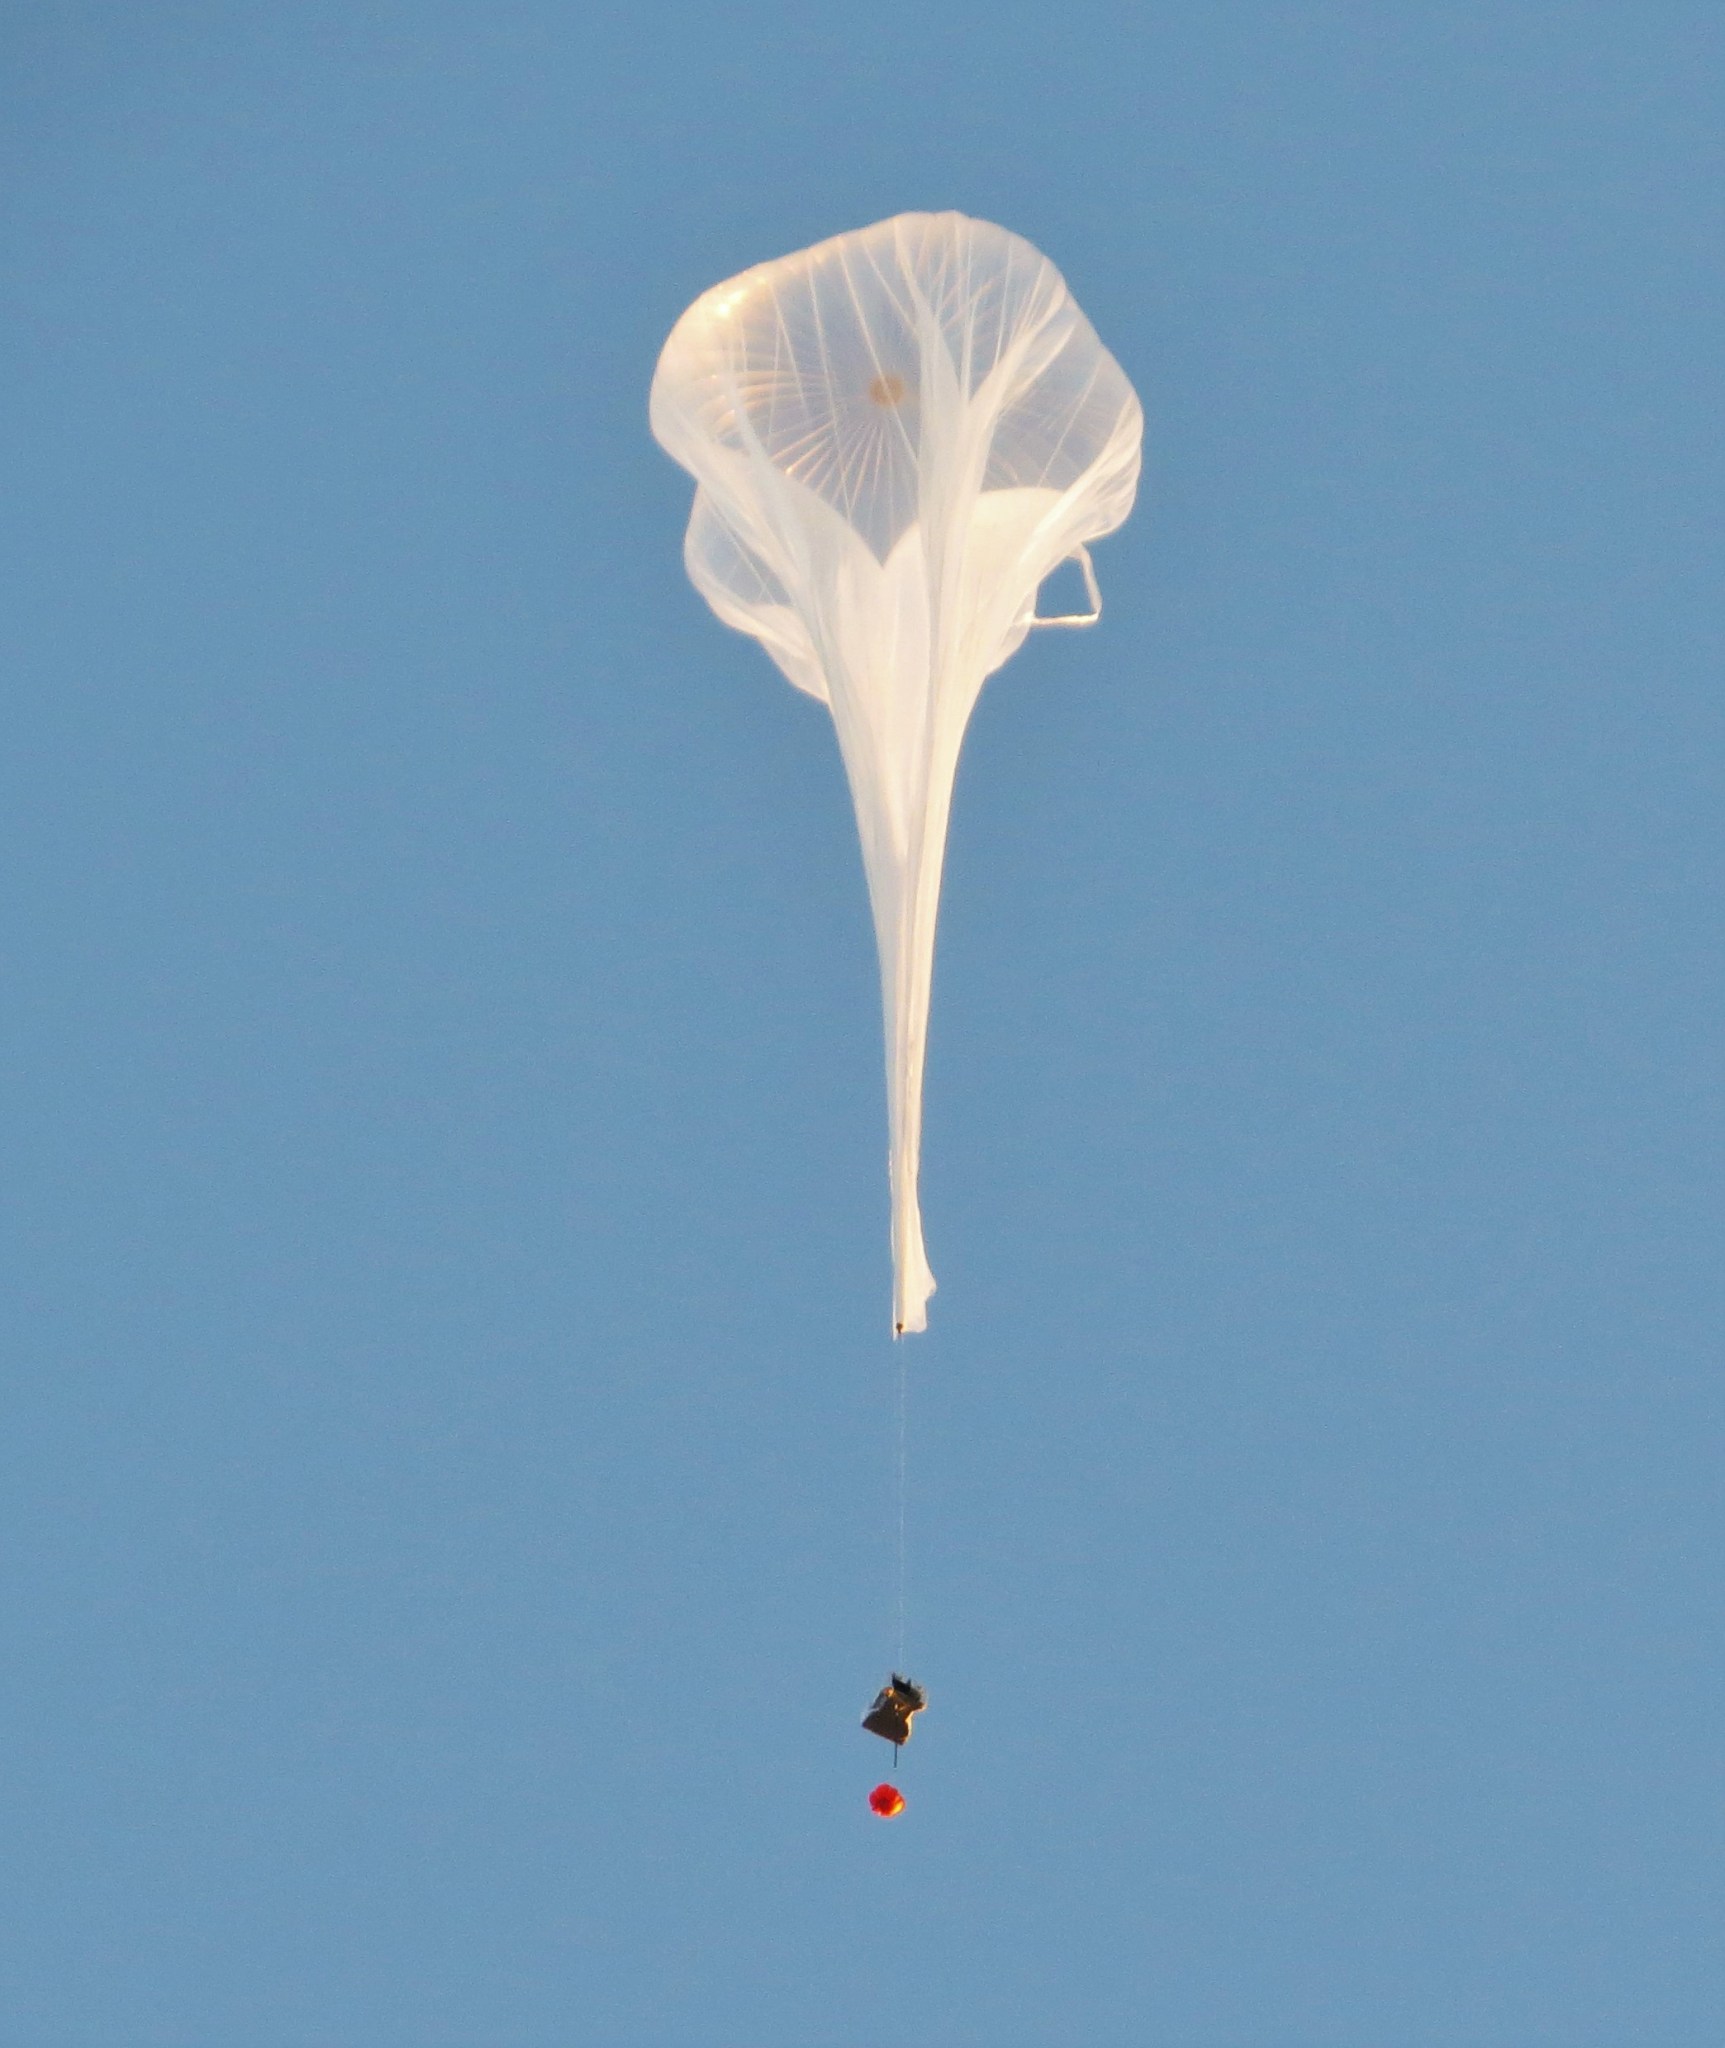 World View launched their high-altitude balloon to carry solar research payload.